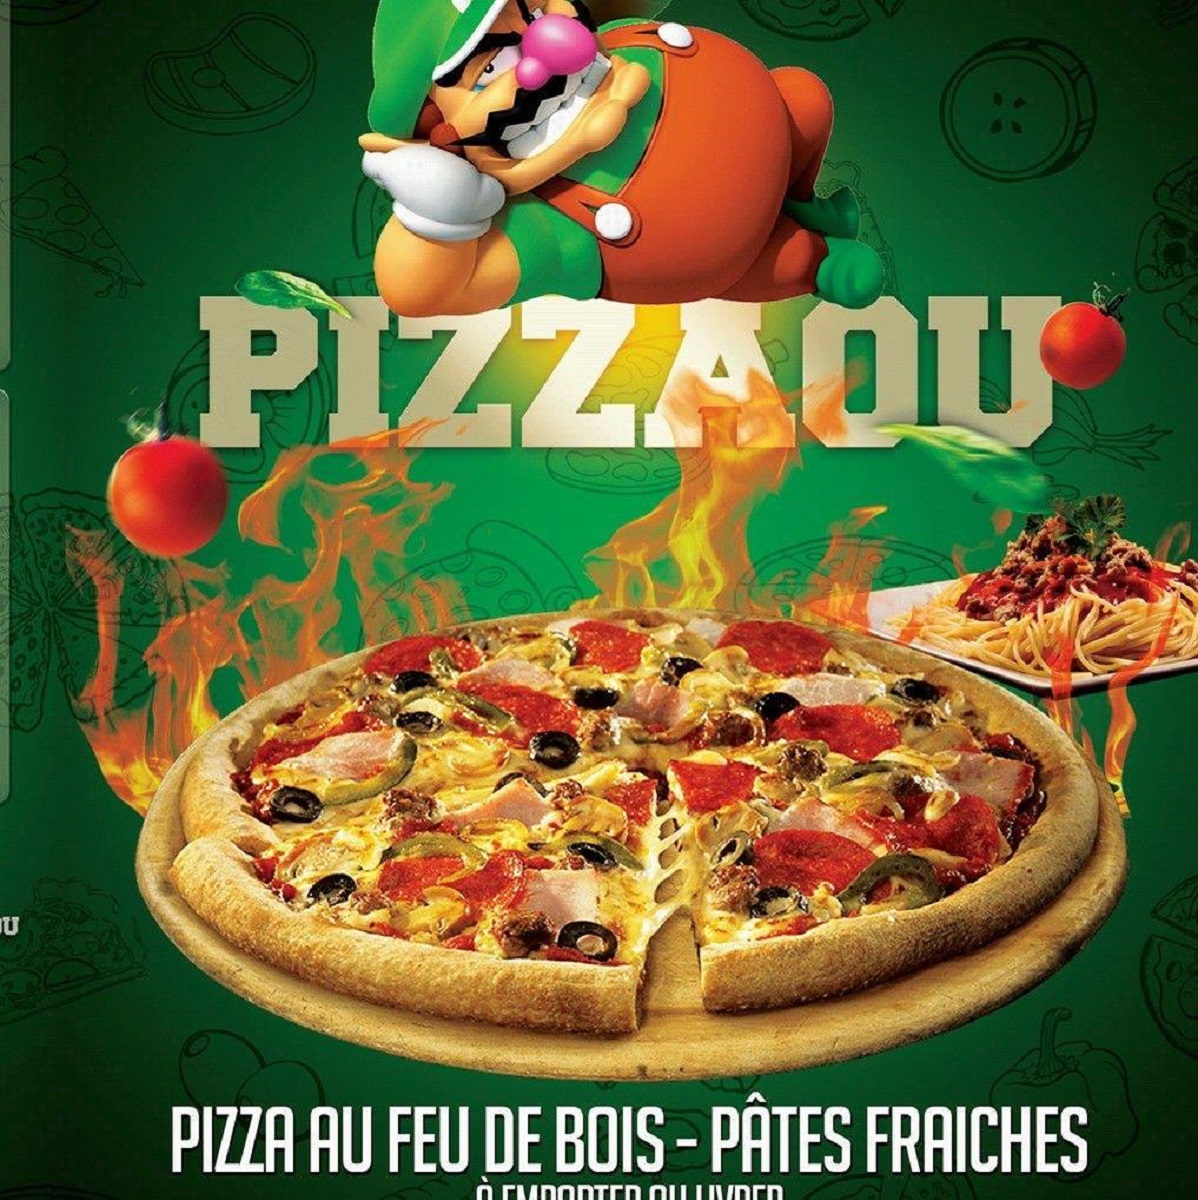 Flyer - Pizzaou